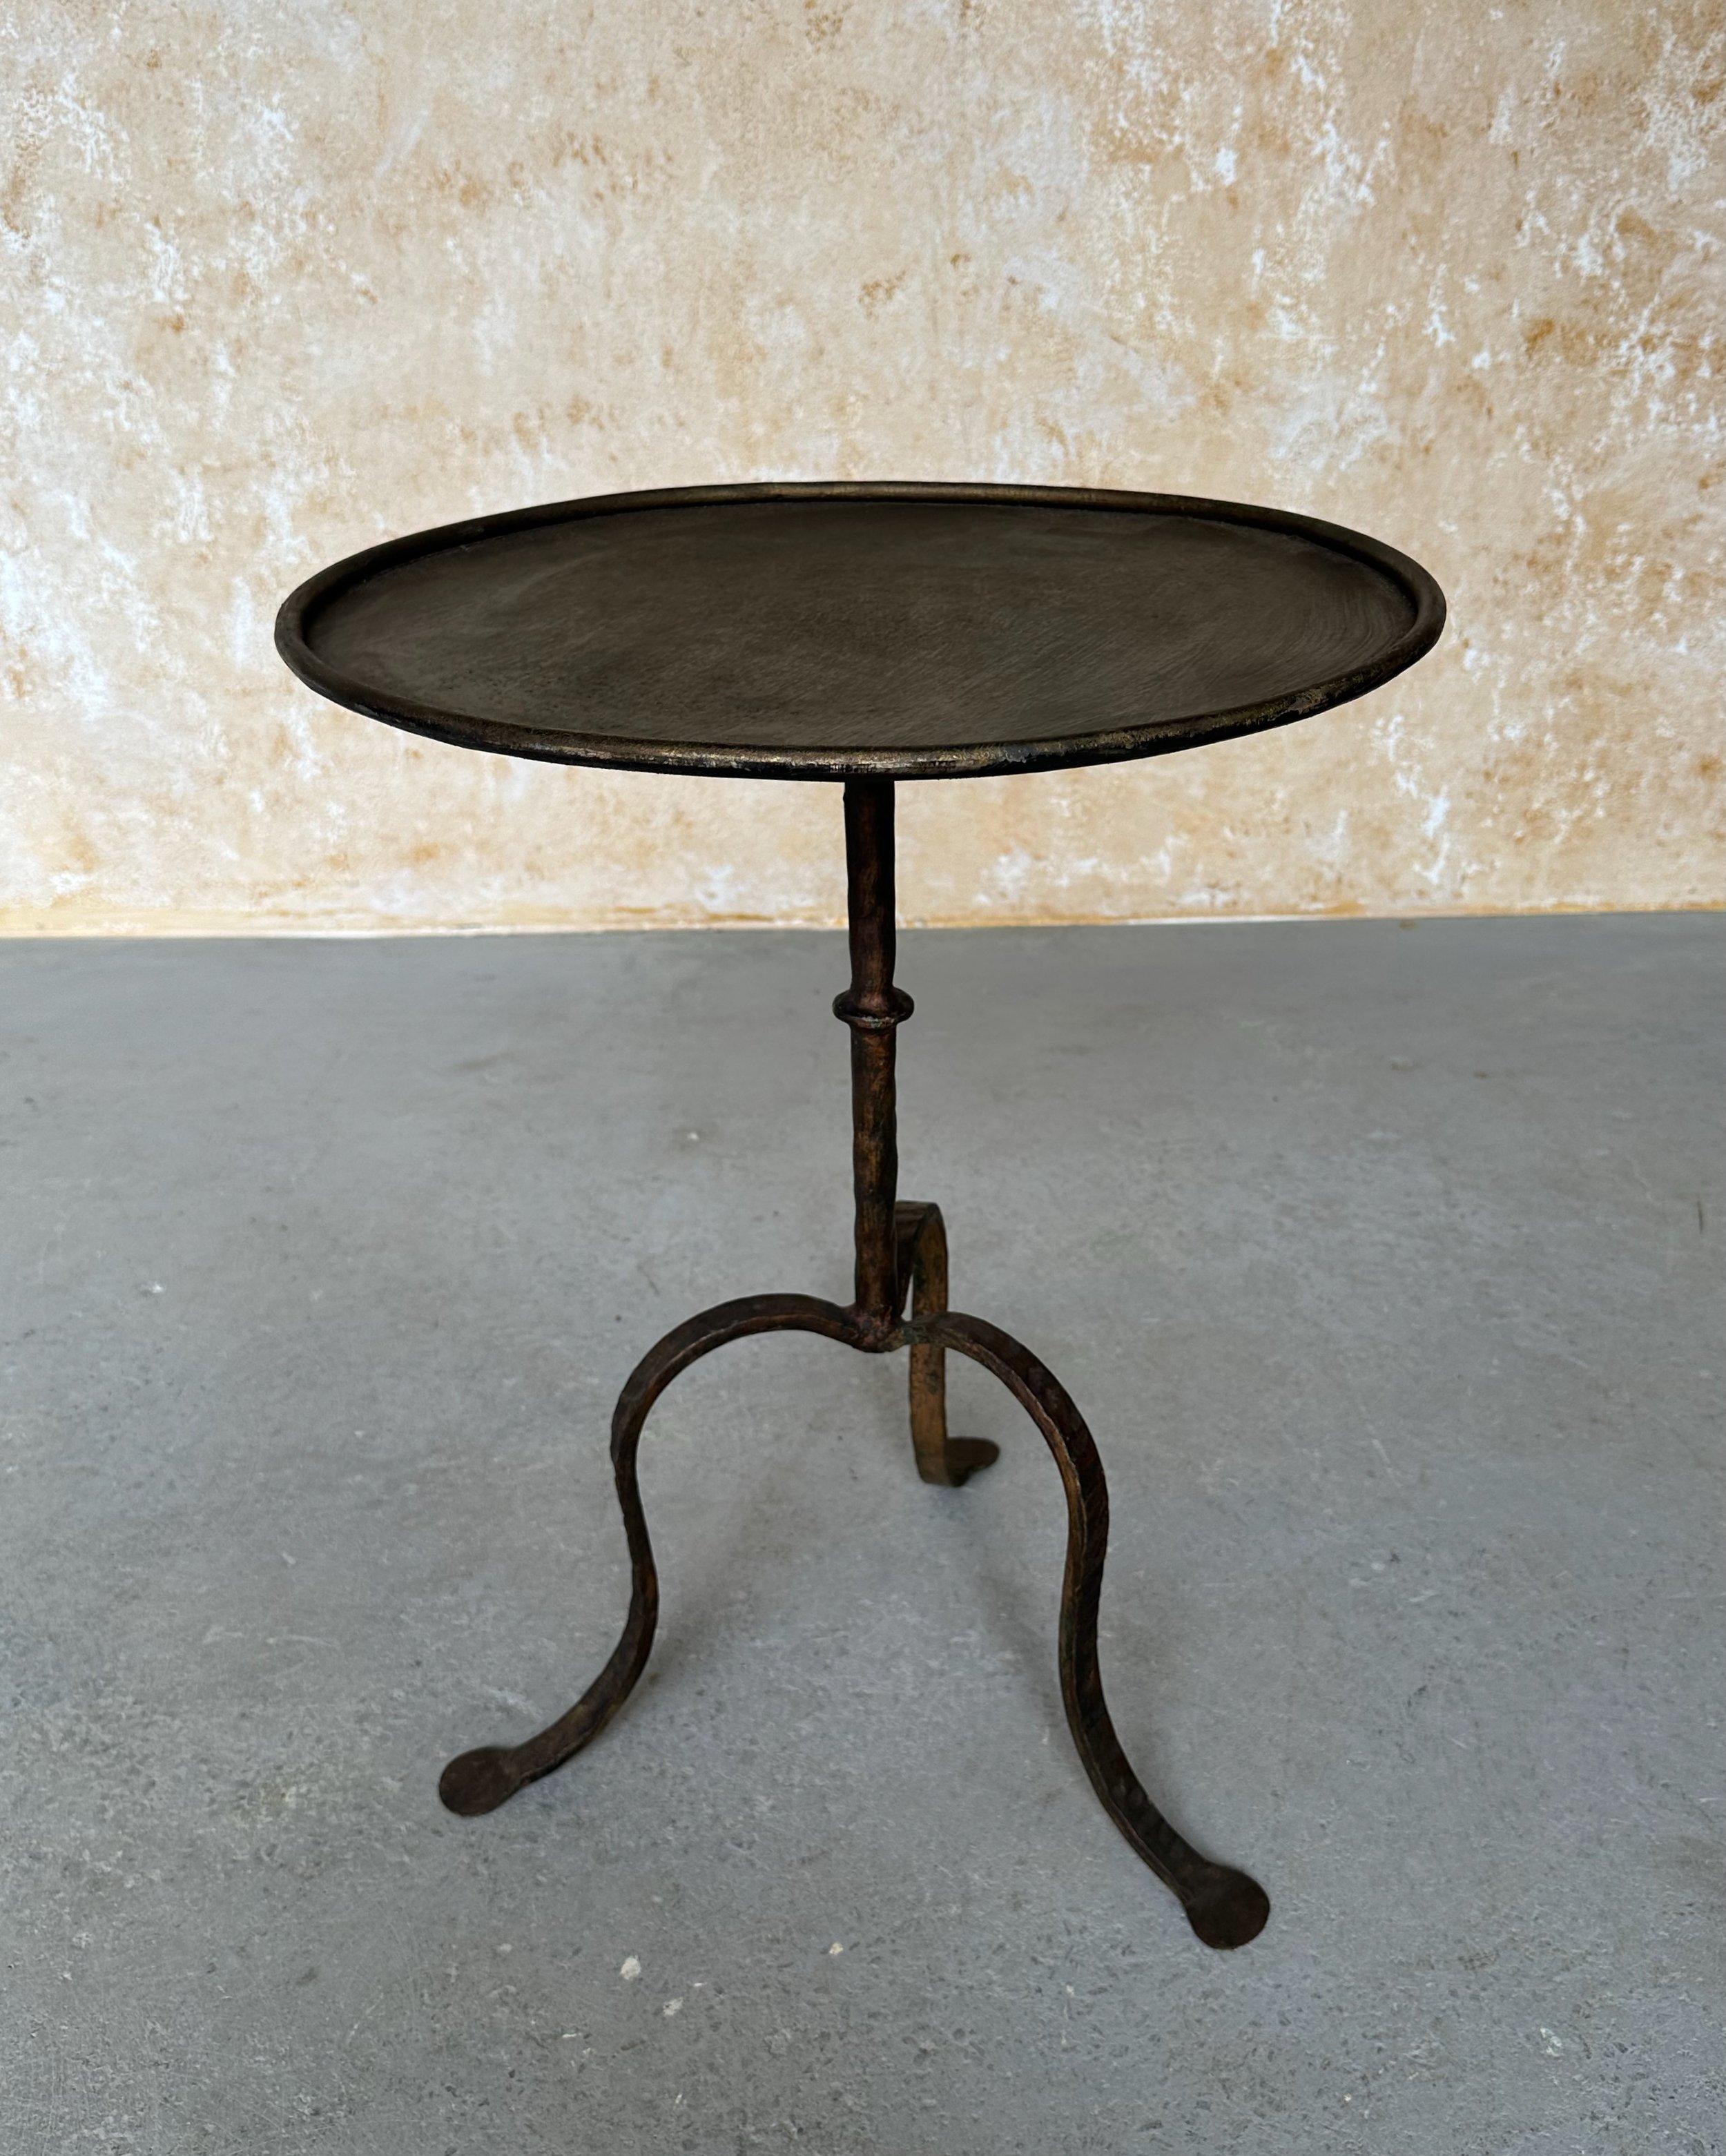 Hammered Vintage Spanish Iron Drinks Table with Curved Legs